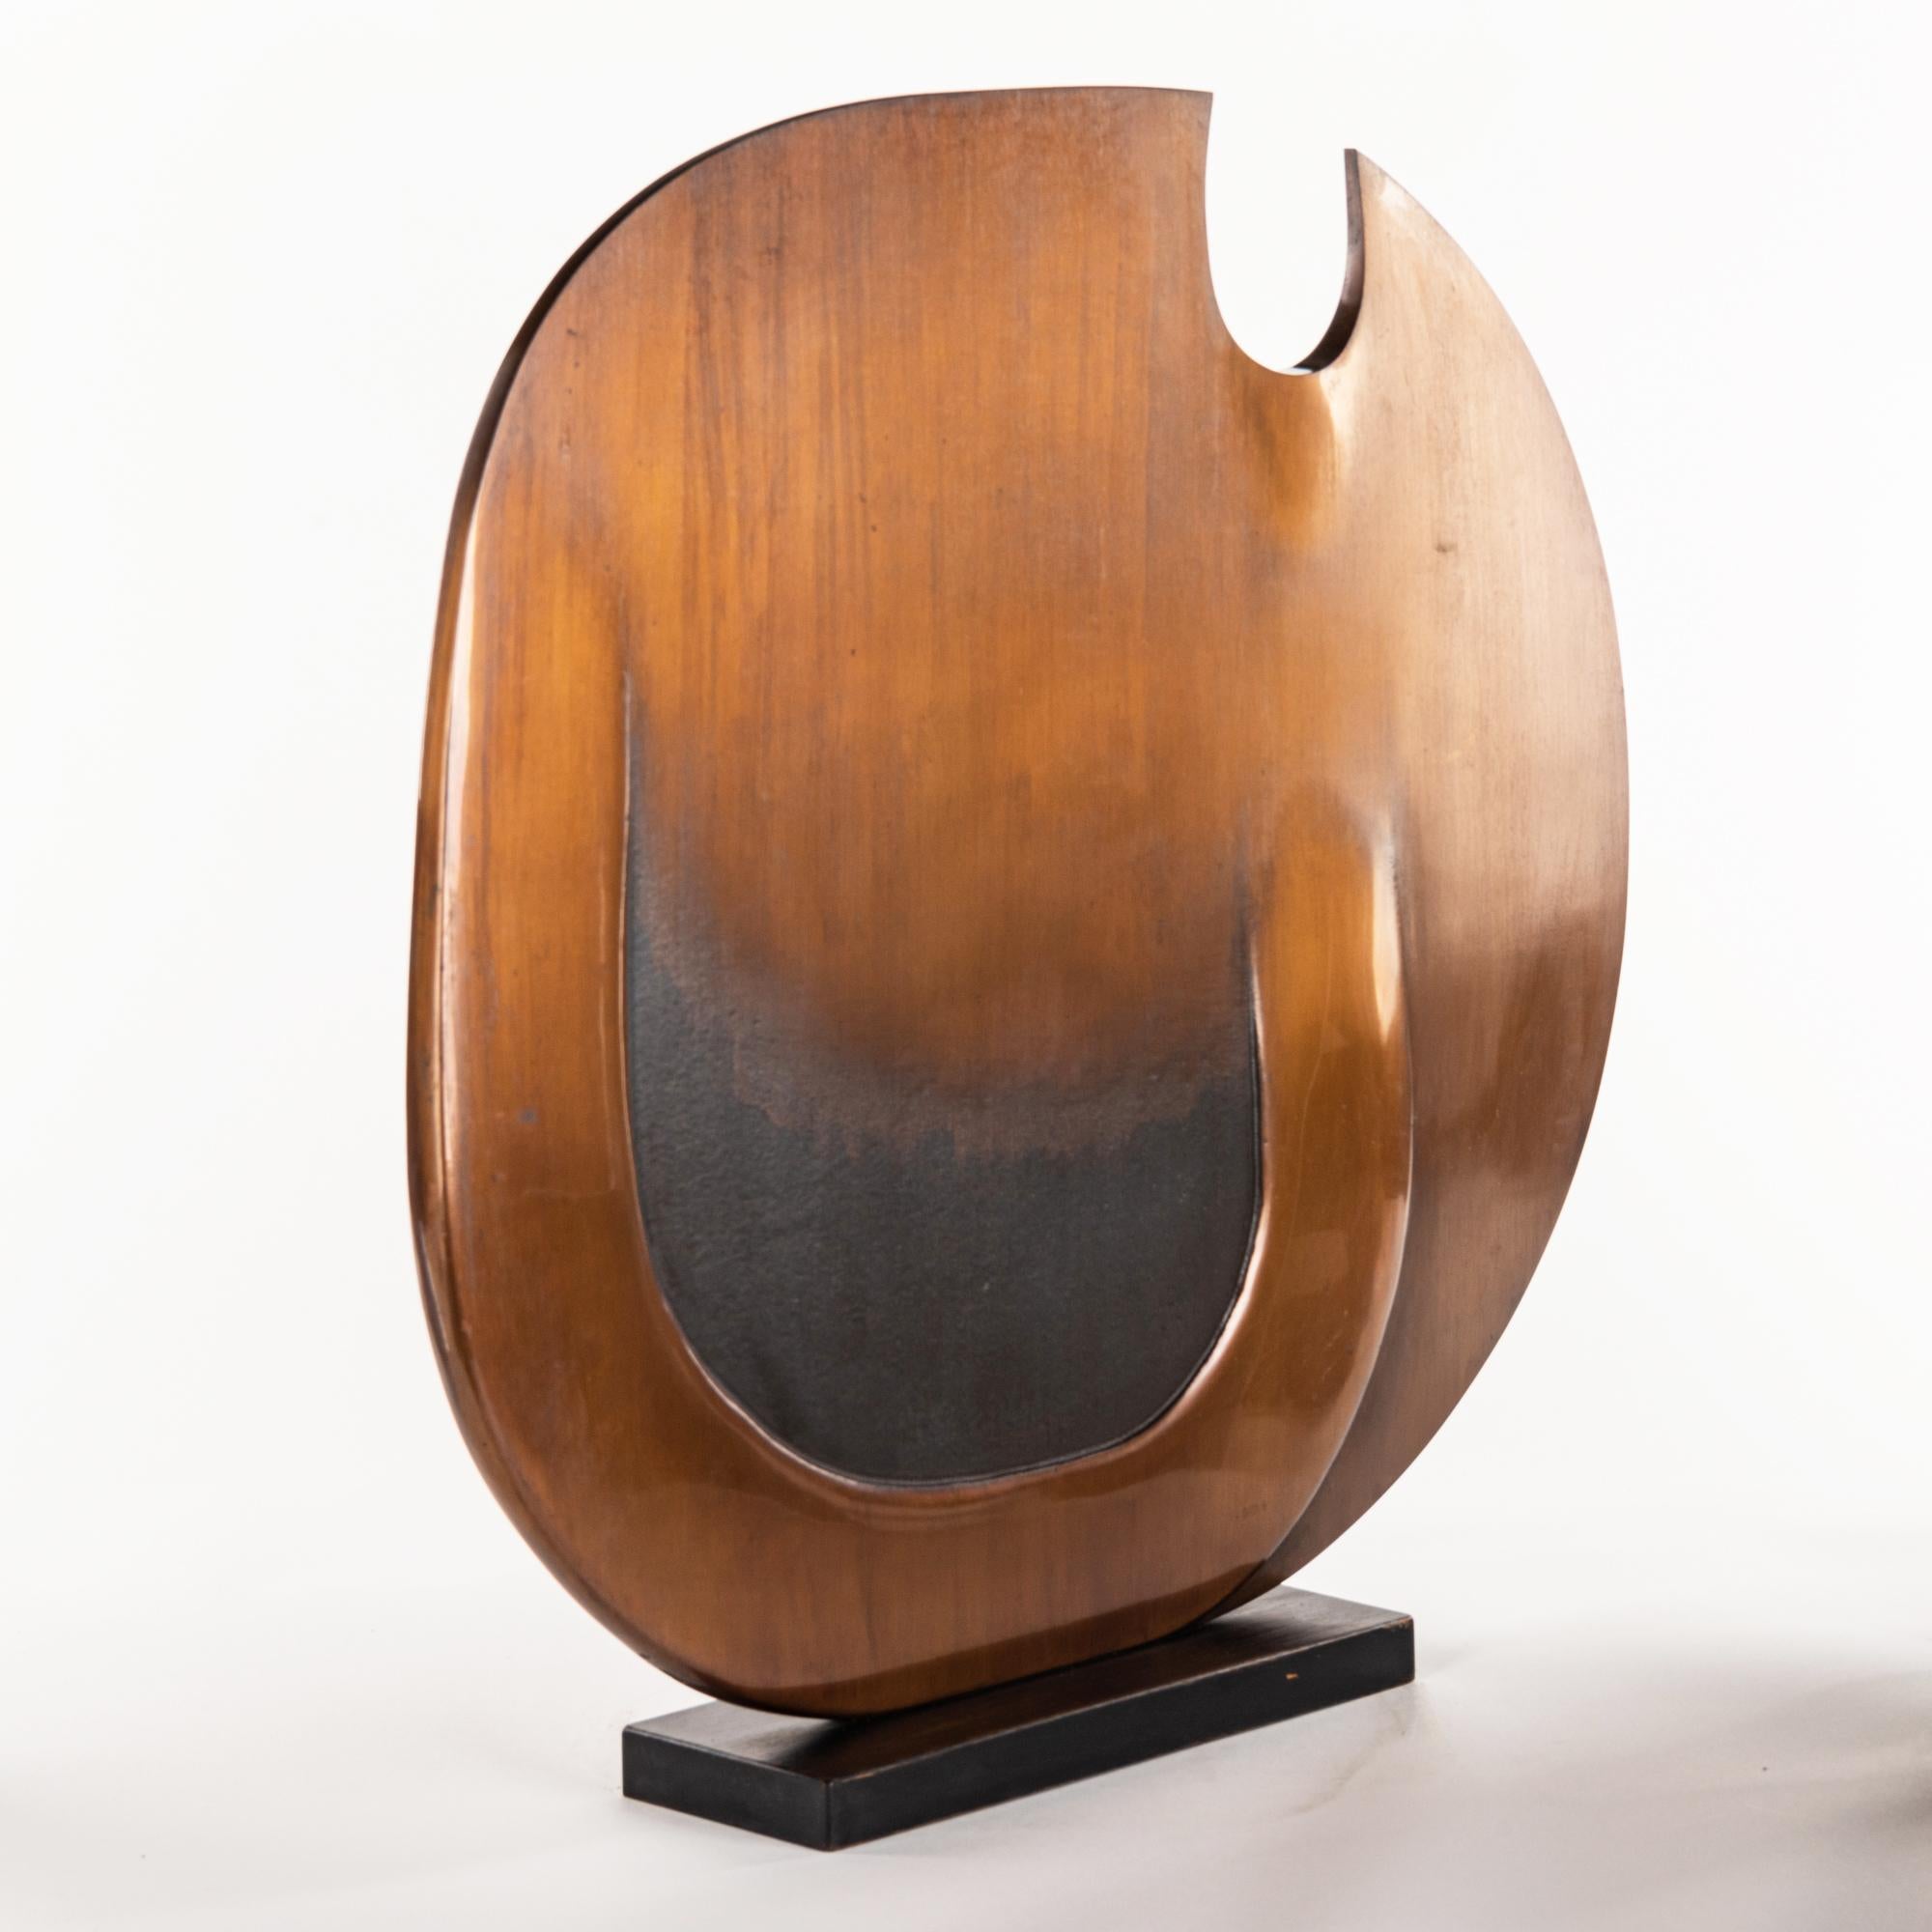 OVOID VARIATION No.1 1980 (Opus 397) - Brown Abstract Sculpture by Robert Adams